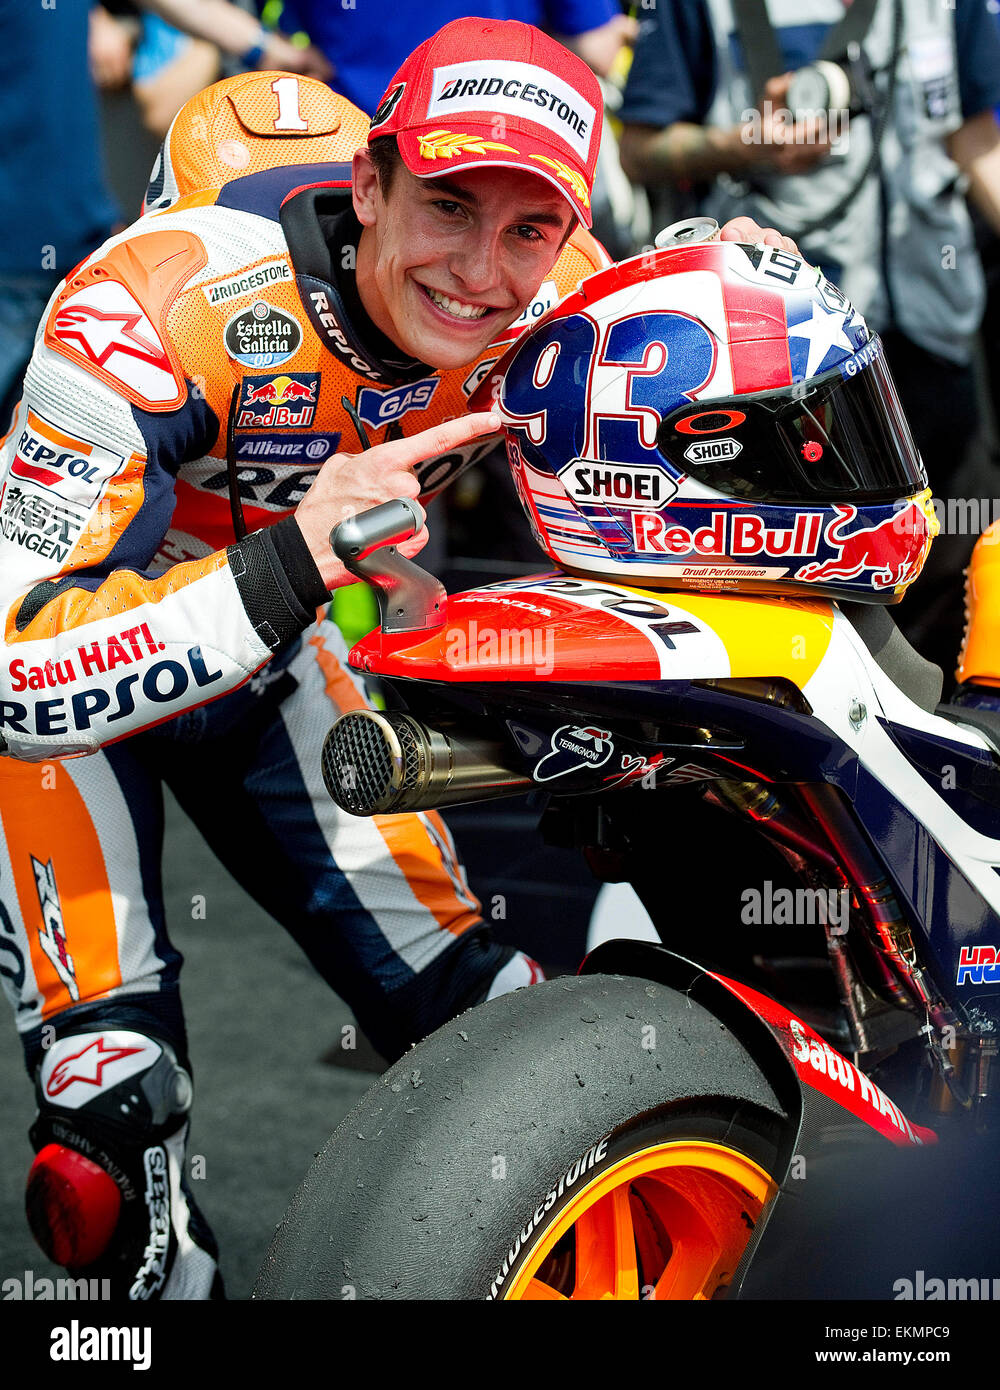 April 12, 2015: Marc Marquez #93 with Repsol Honda Team takes first place  in MotoGP at Red Bull Grand Prix of the Americas. Austin, Texas Stock Photo  - Alamy